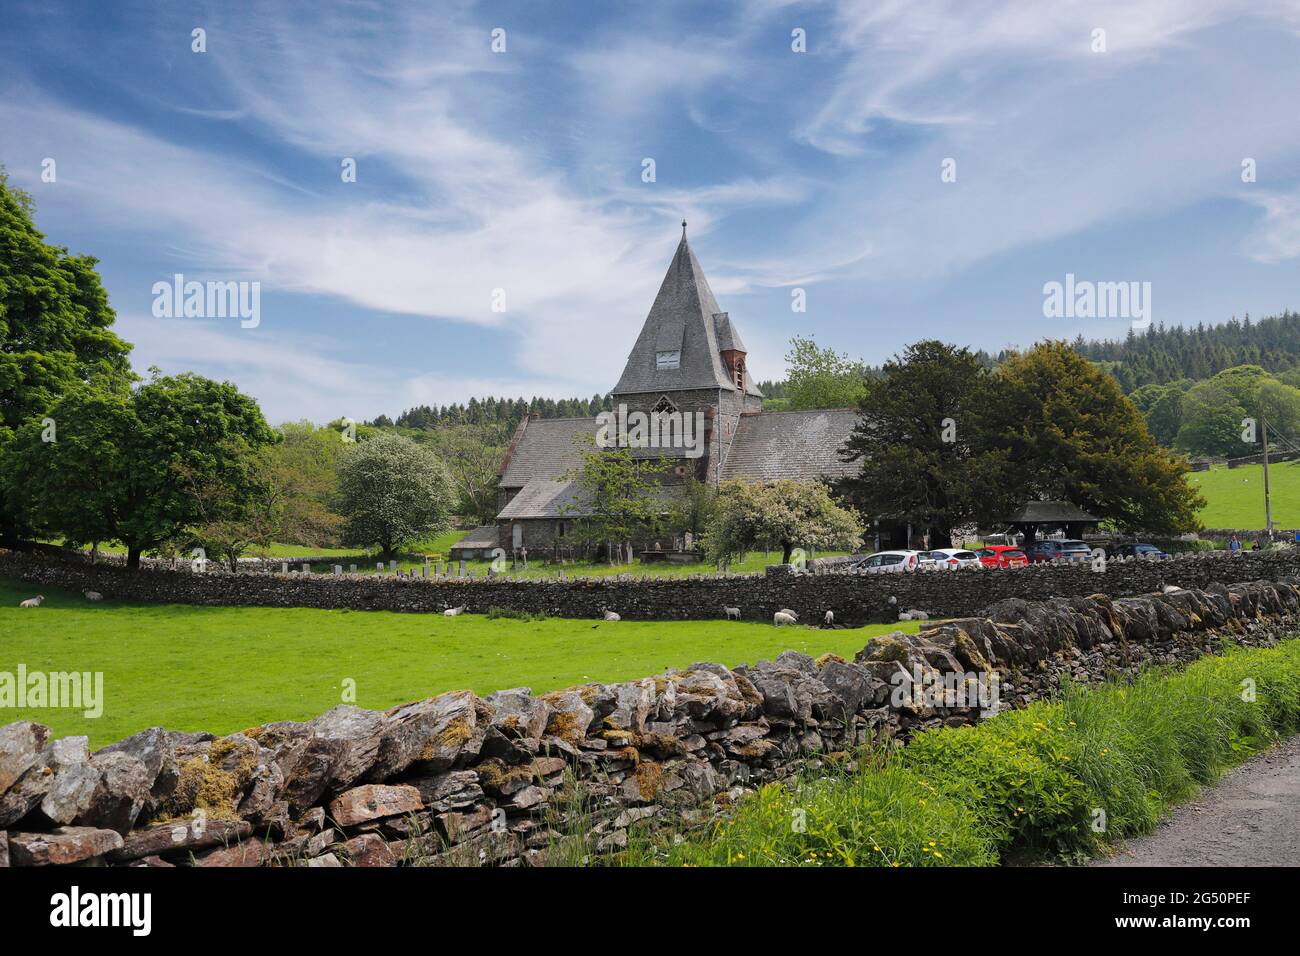 St Peters church at Finsthwaite in the English Lake District Stock Photo